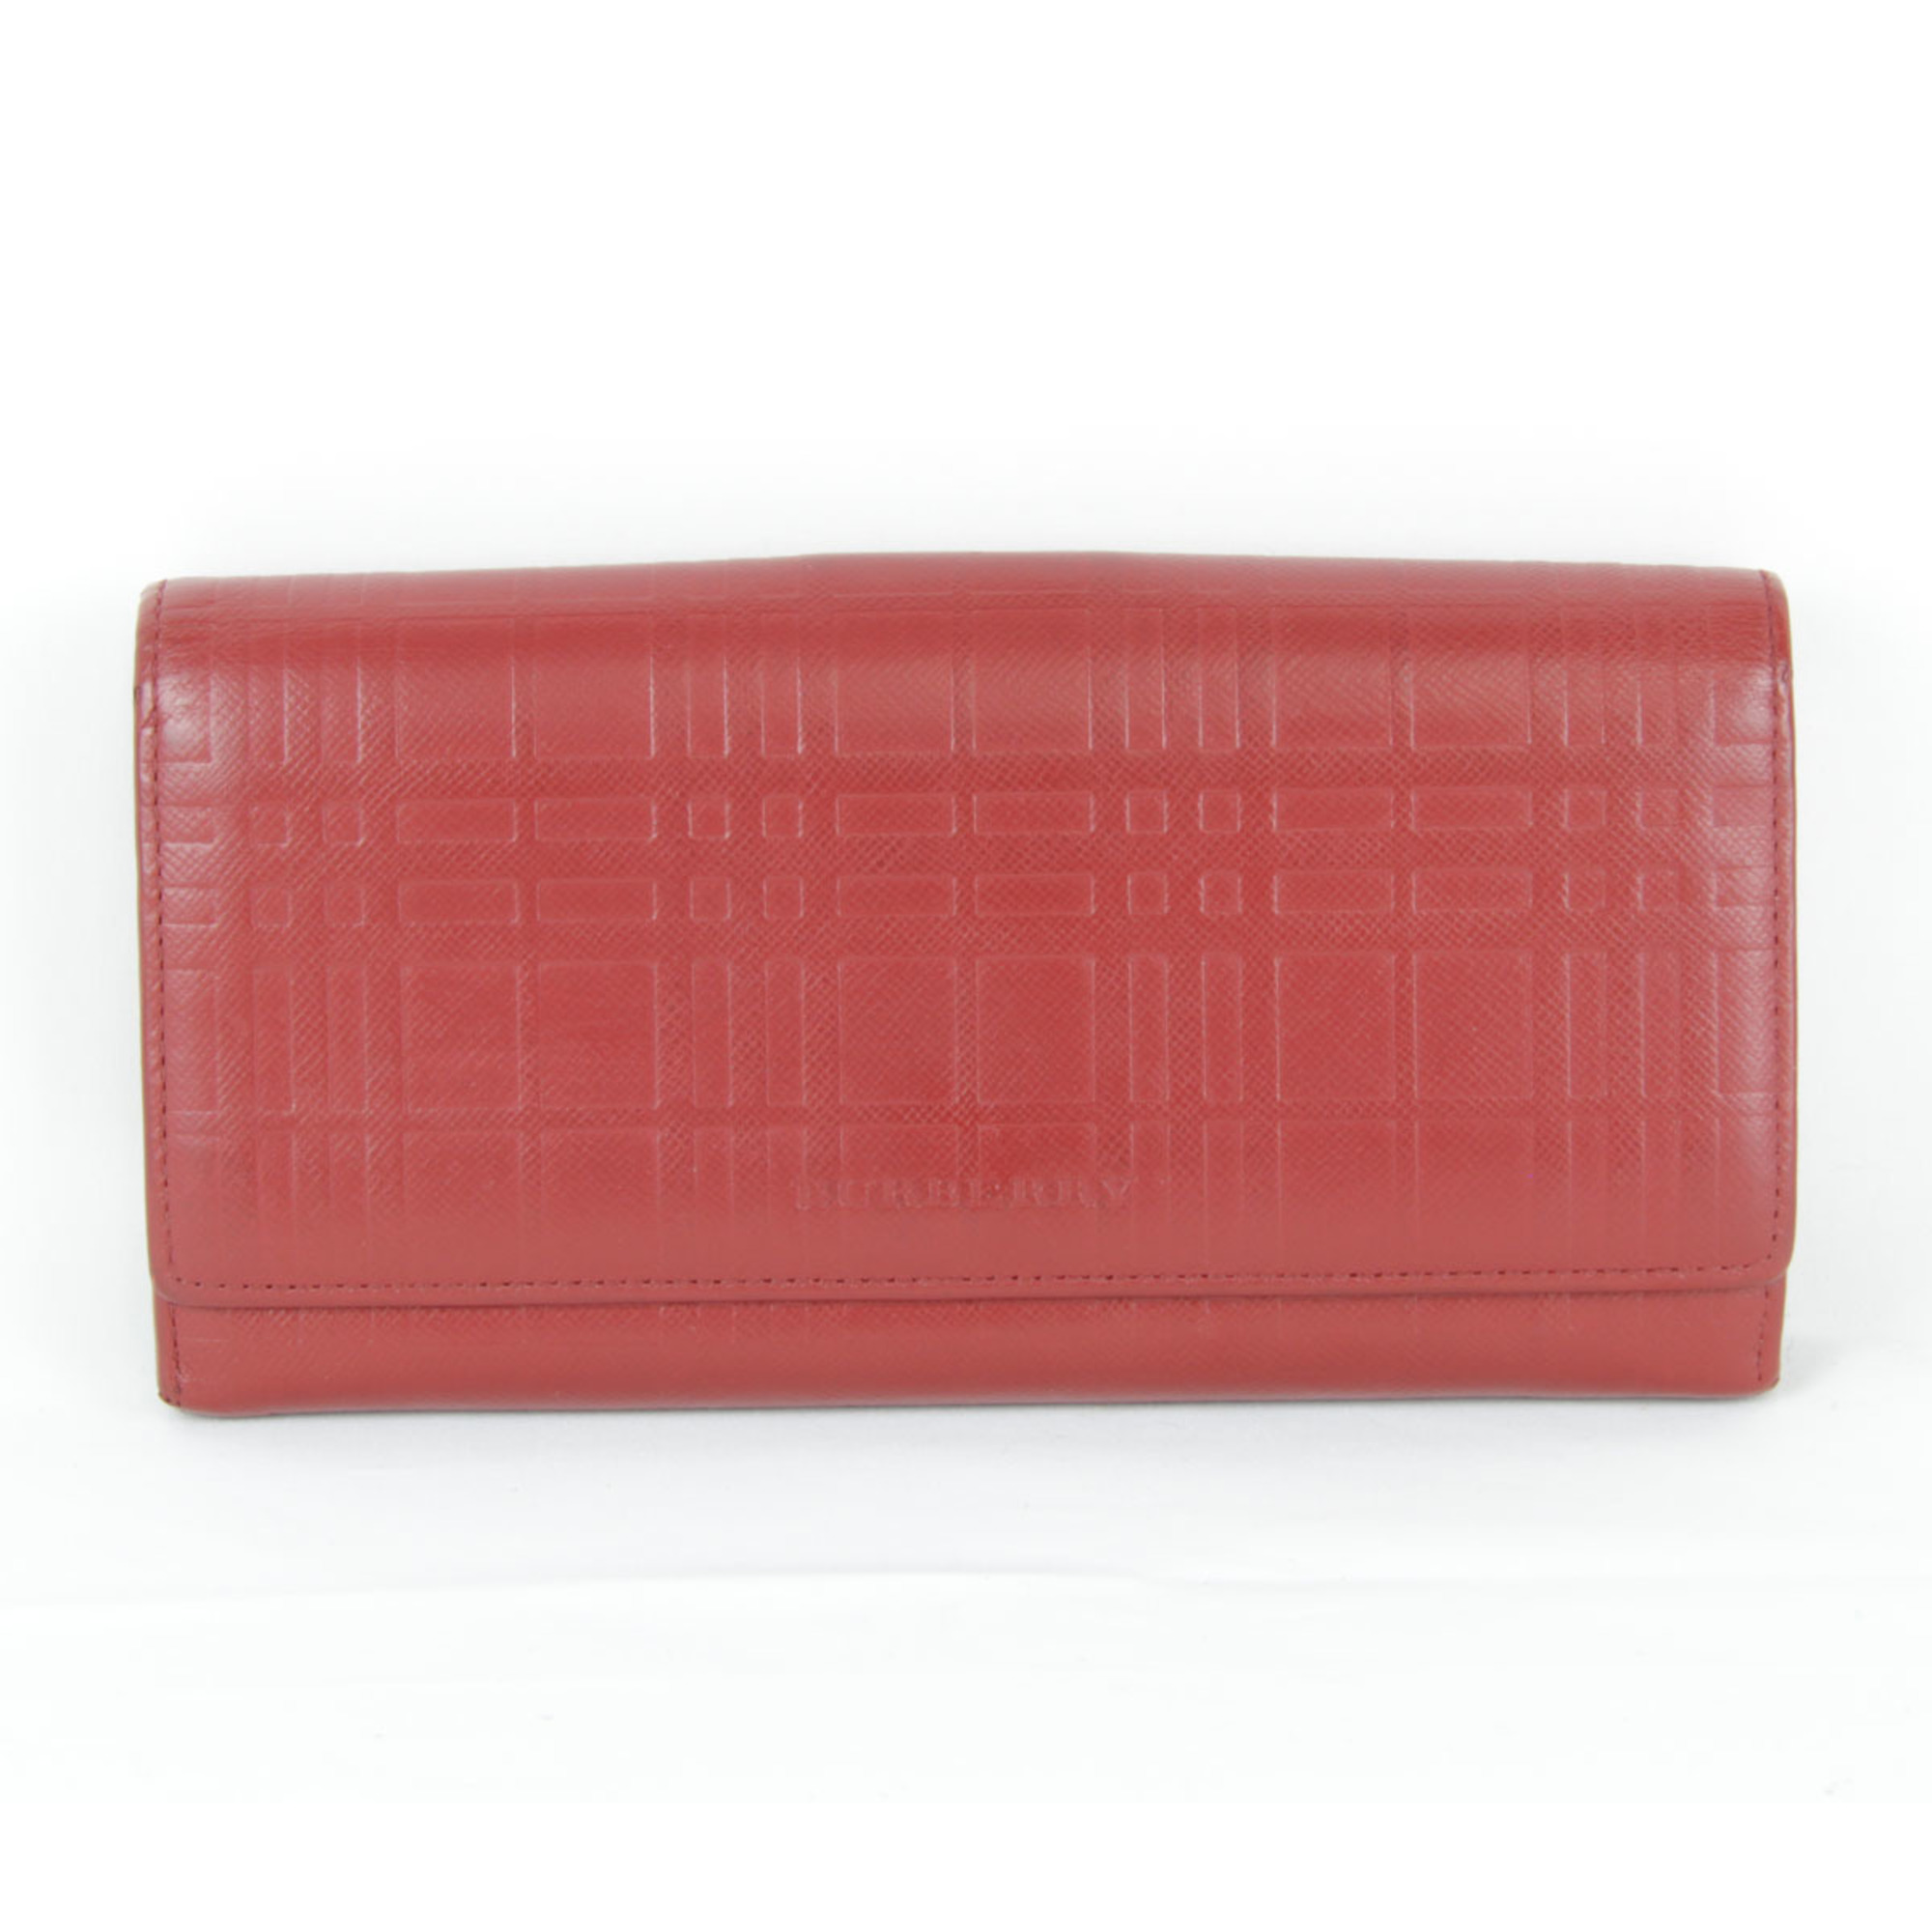 BURBERRY Burberry long wallet leather wine red ladies